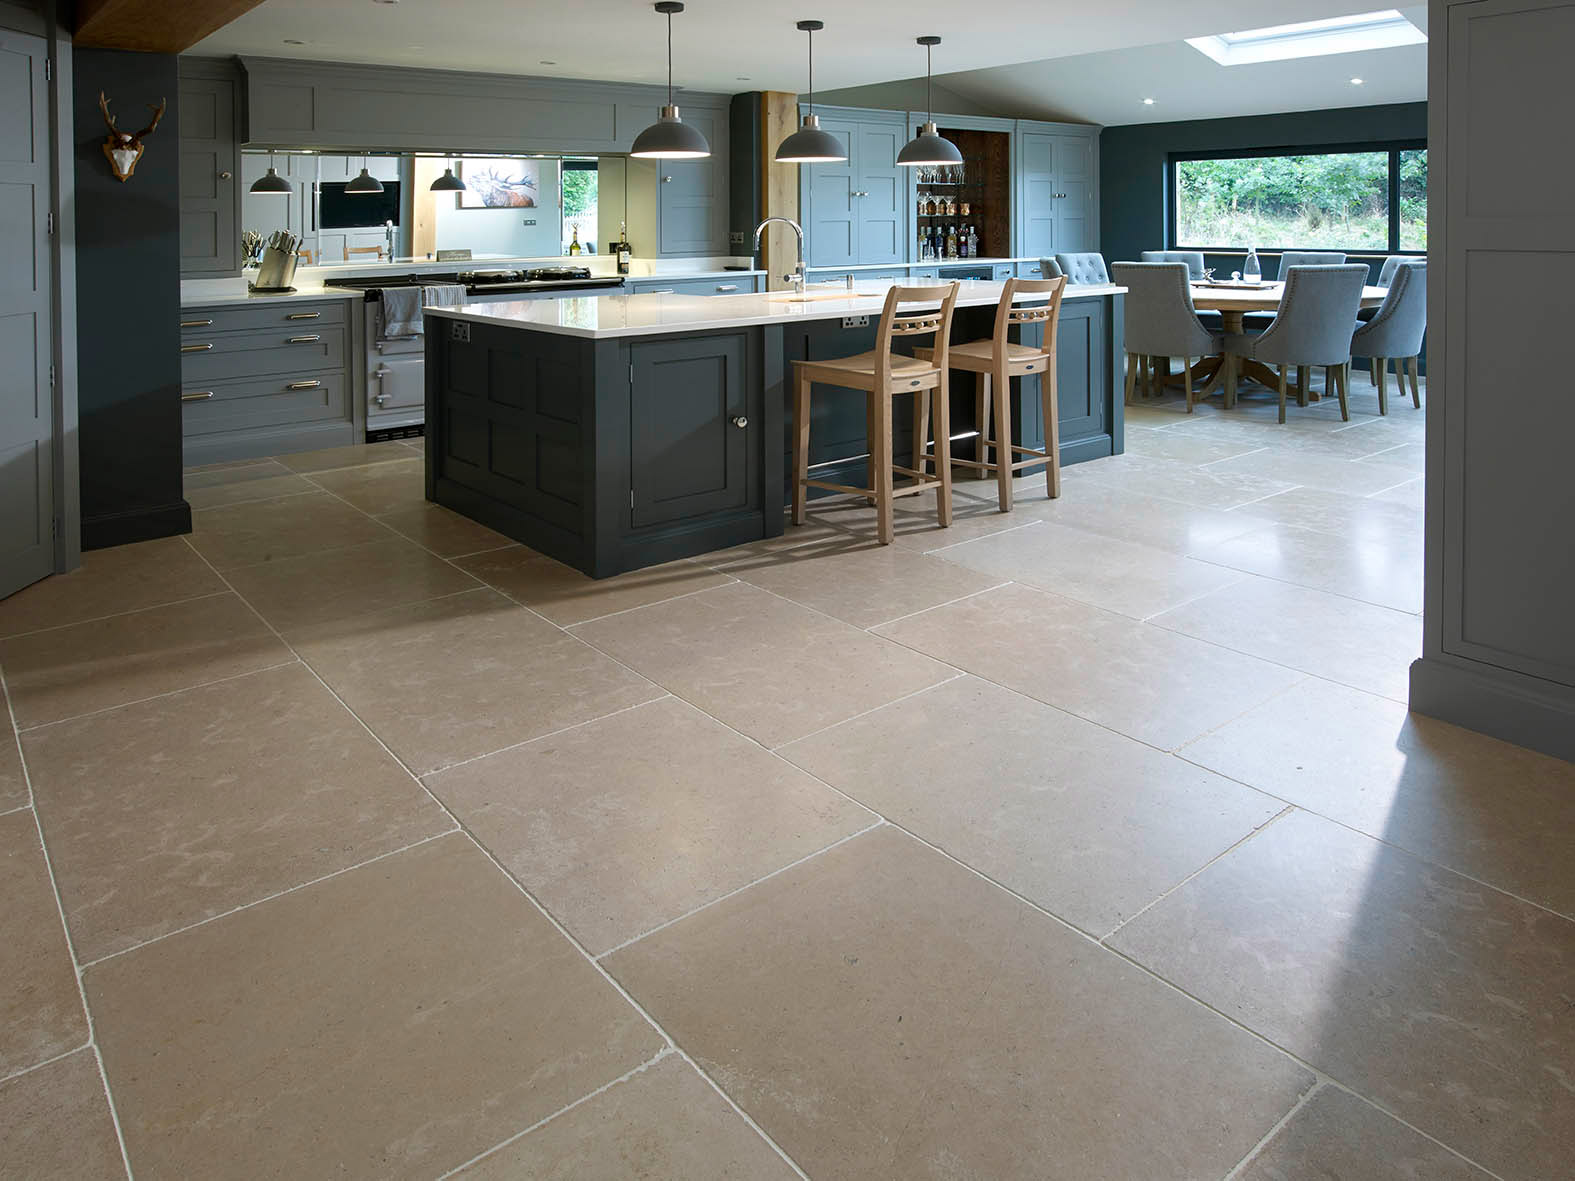 4 ways that stone tiles can make your home feel and look bigger